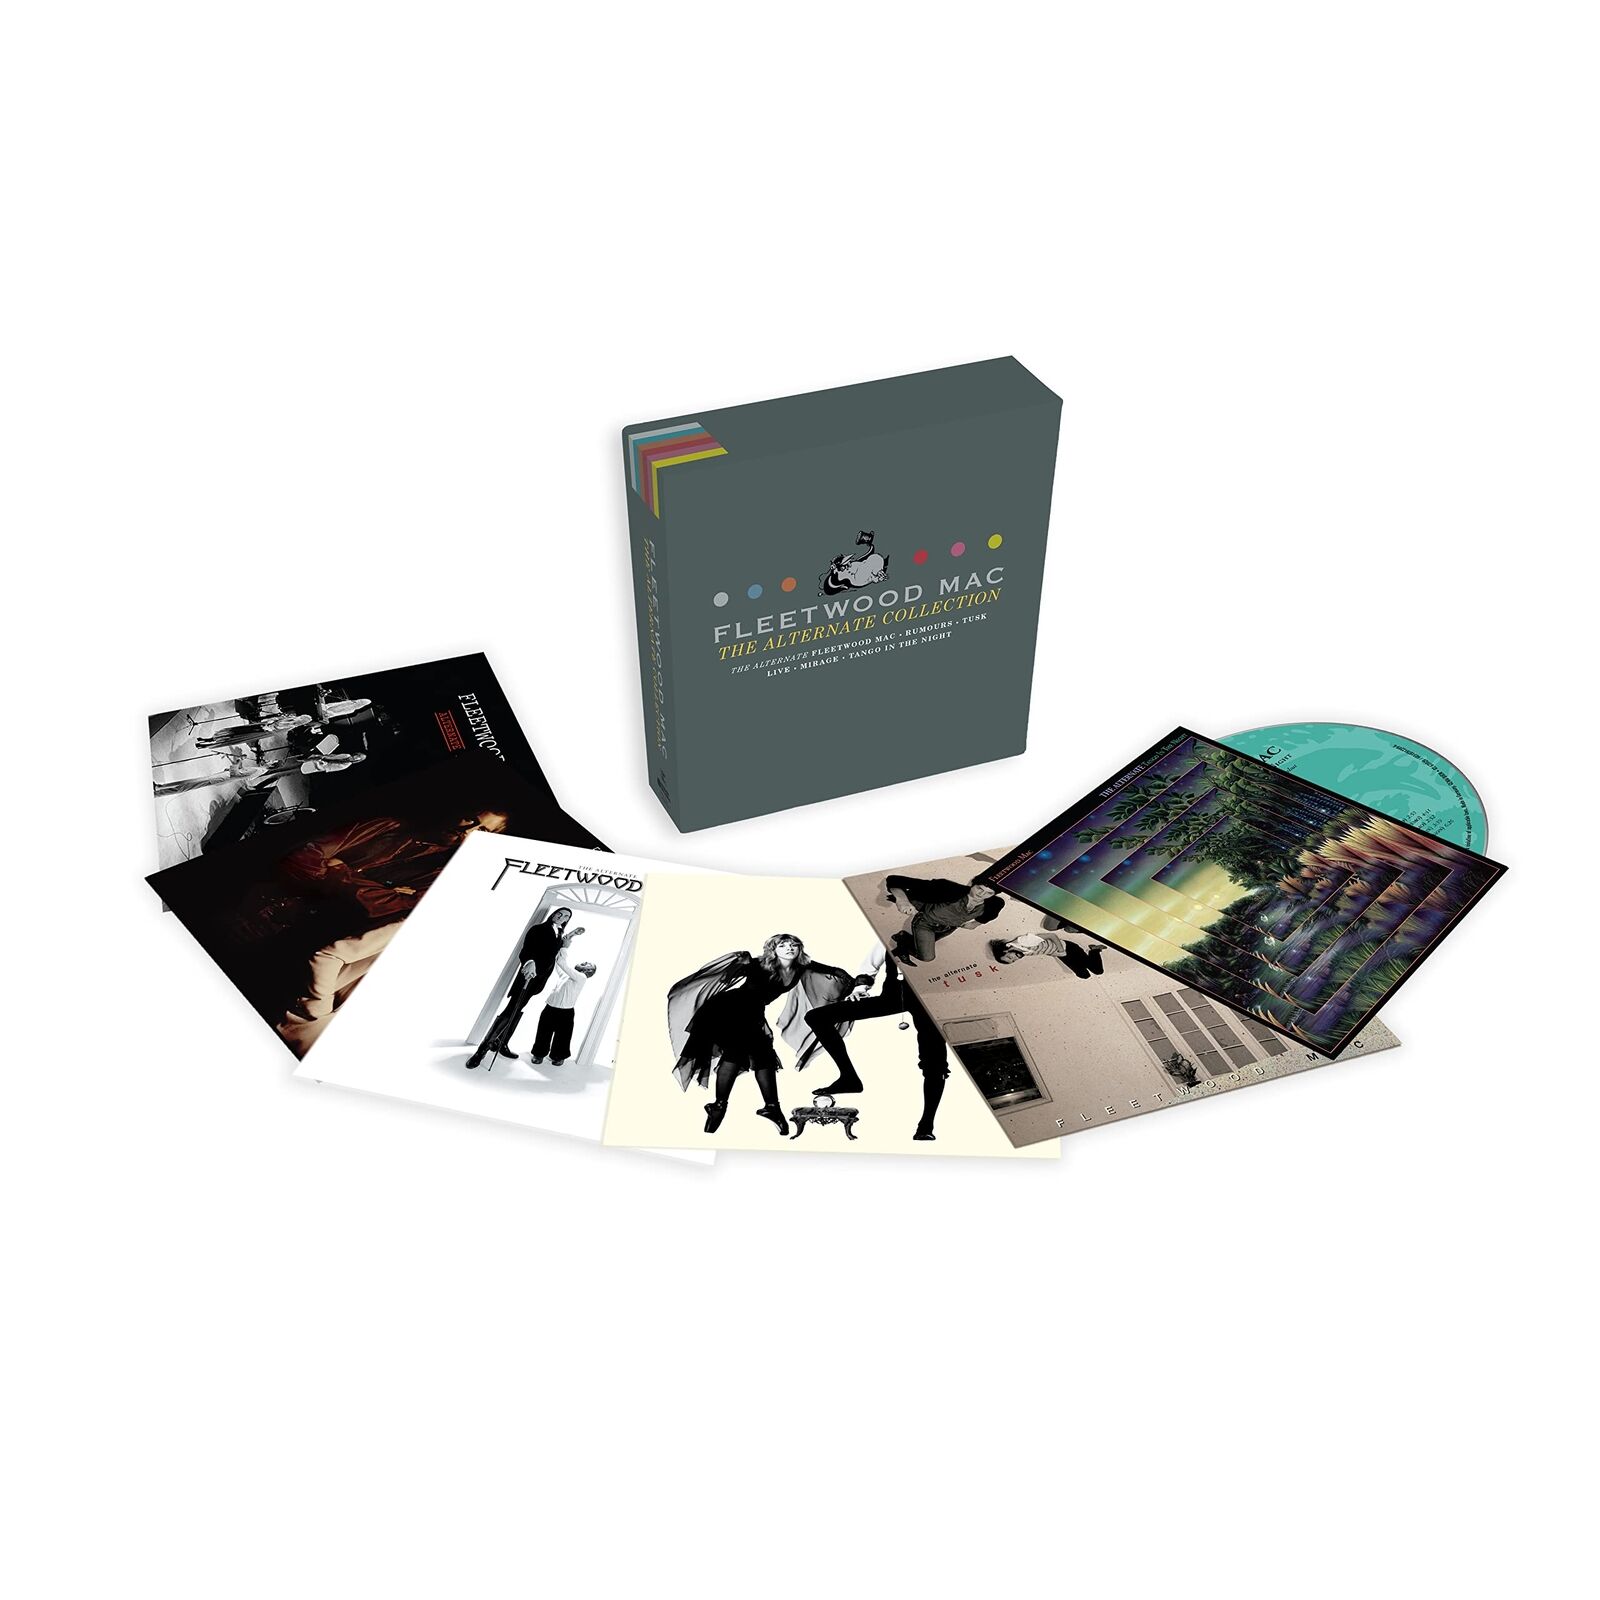 Fleetwood Mac The Alternate Collection Box) (BF22 EX) (CD) (UK IMPORT)